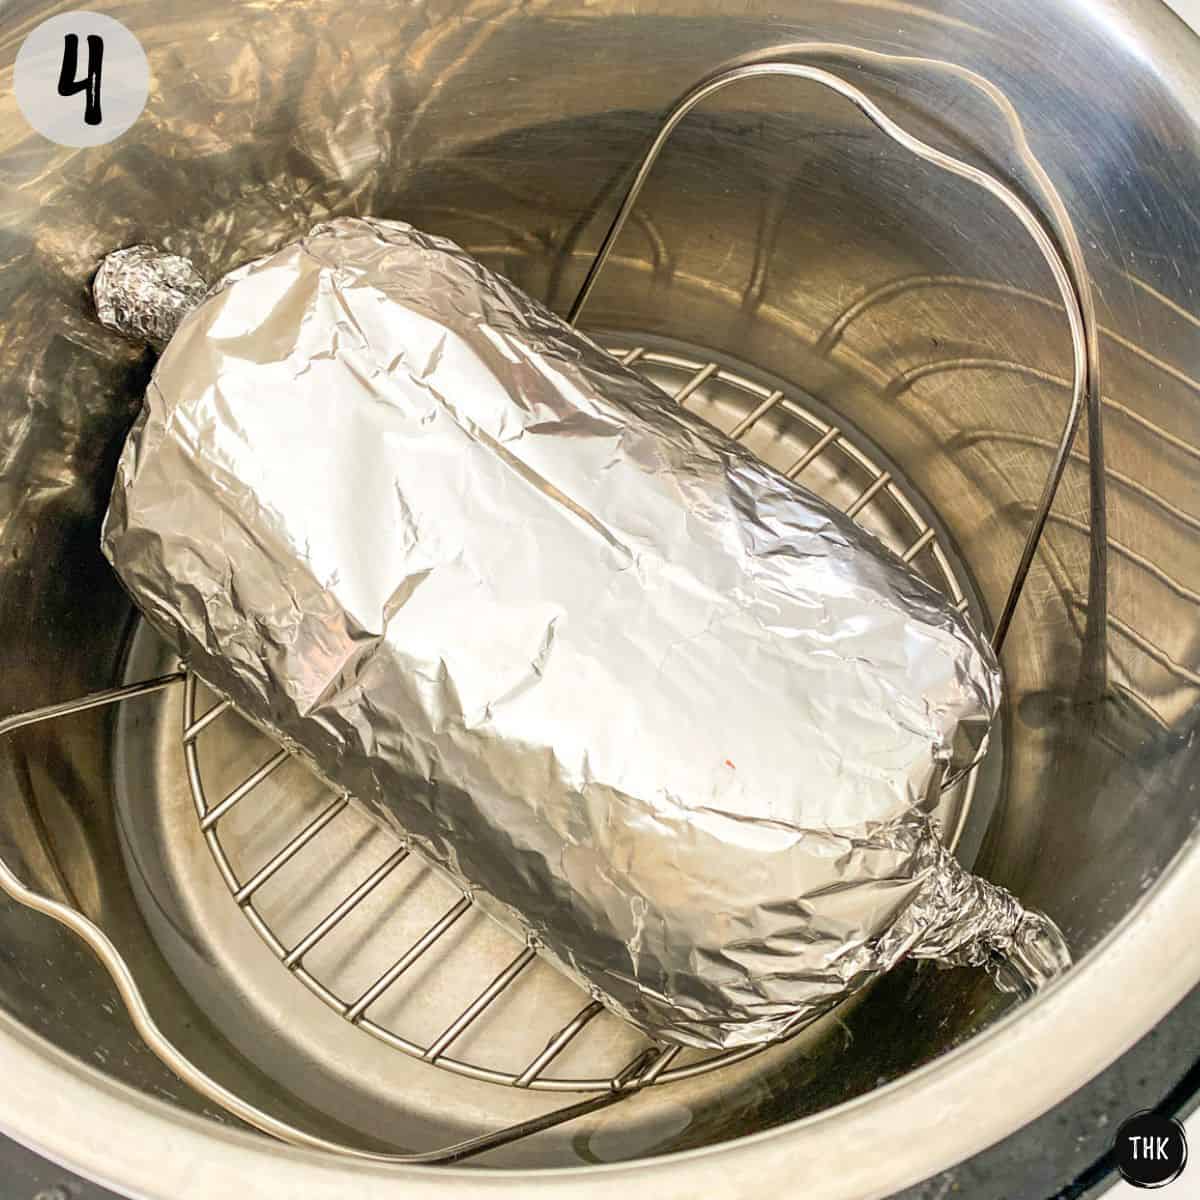 Log shaped roll wrapped in aluminum foil sitting inside Instant Pot.